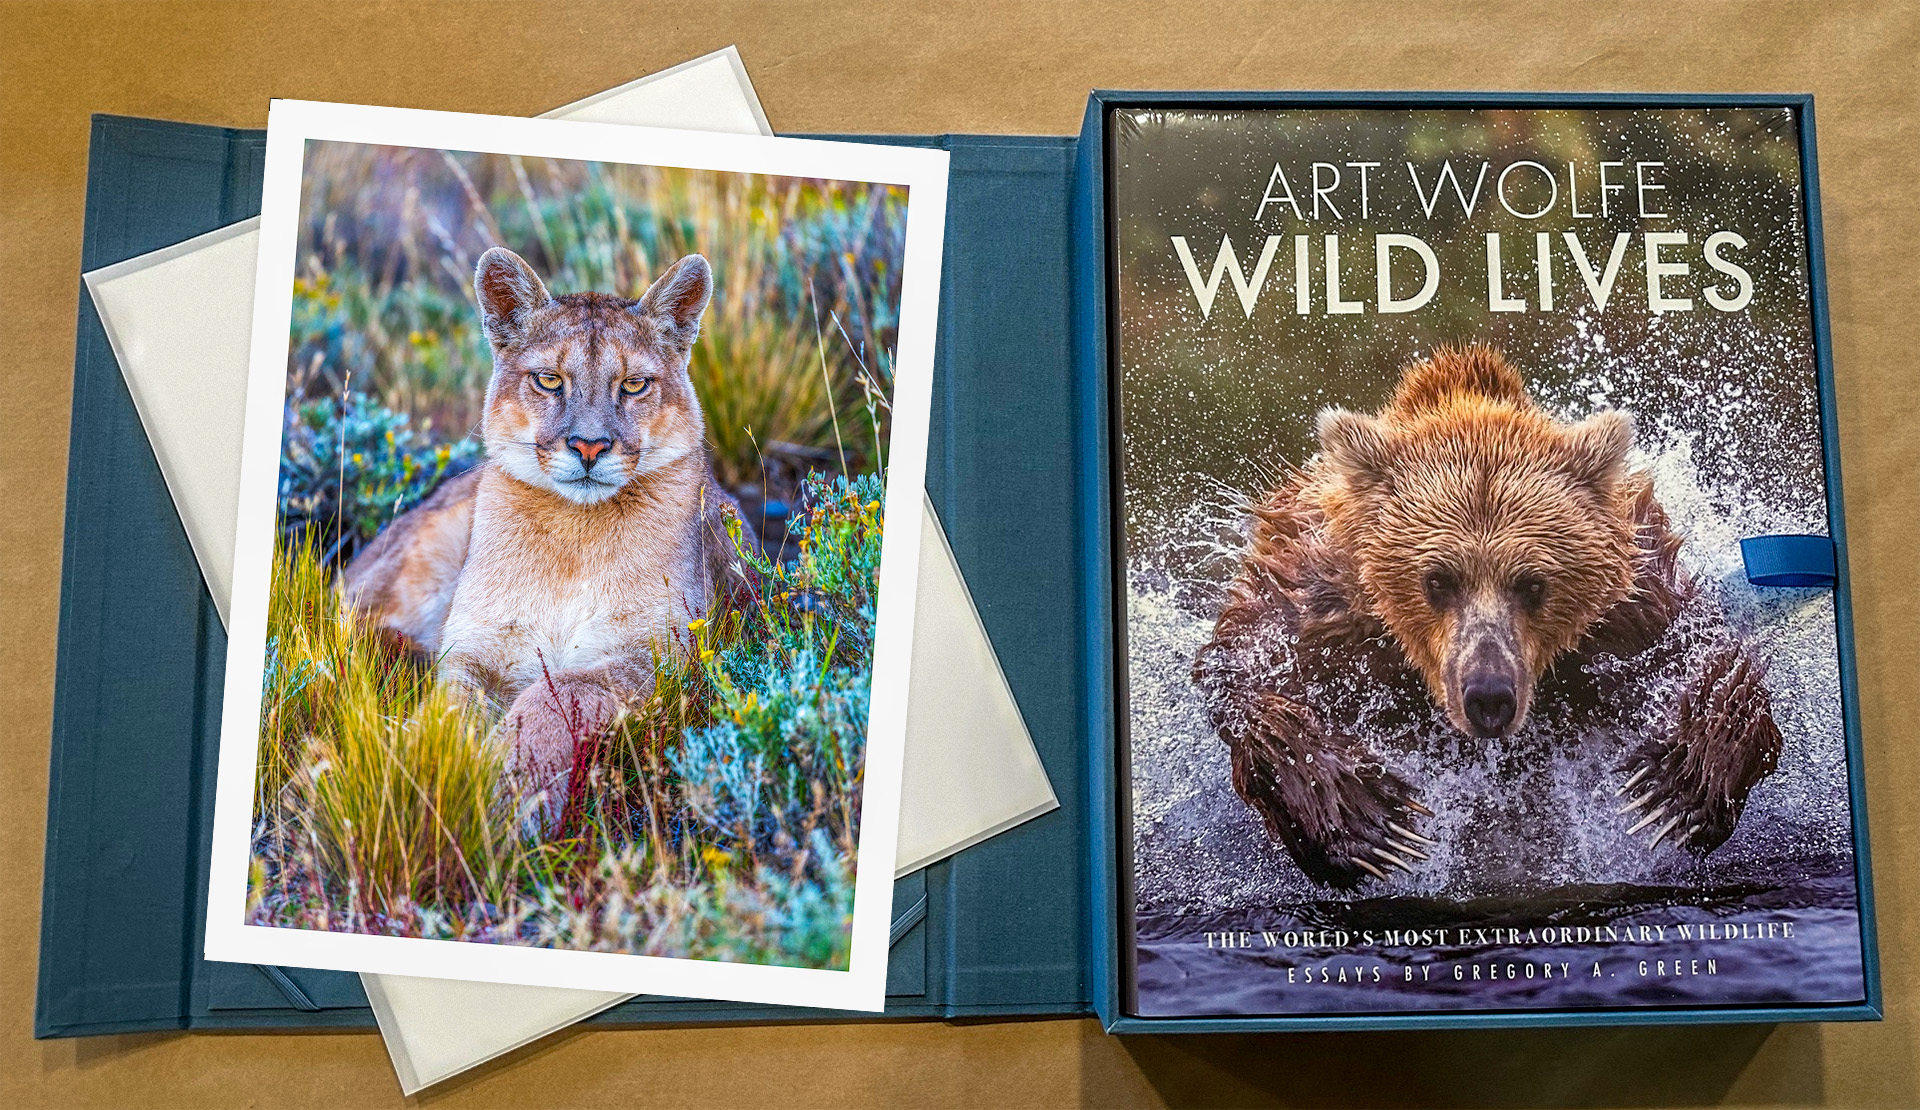 Art Wolfe's Wild Lives - Collector's Edition Book, Print, & Clamshell case.